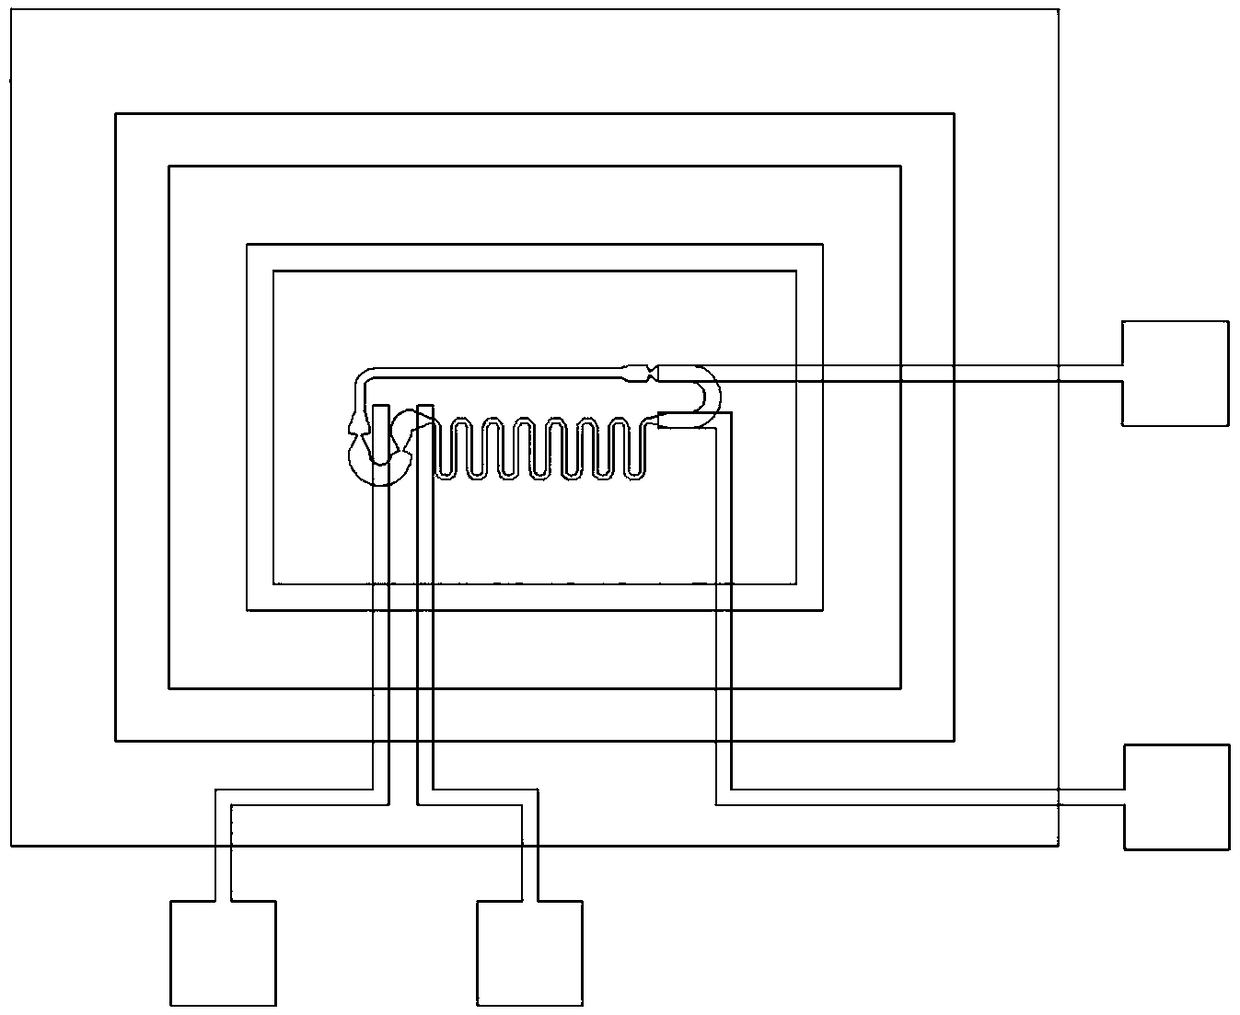 Time-delay inertial microfluidic power connection switch